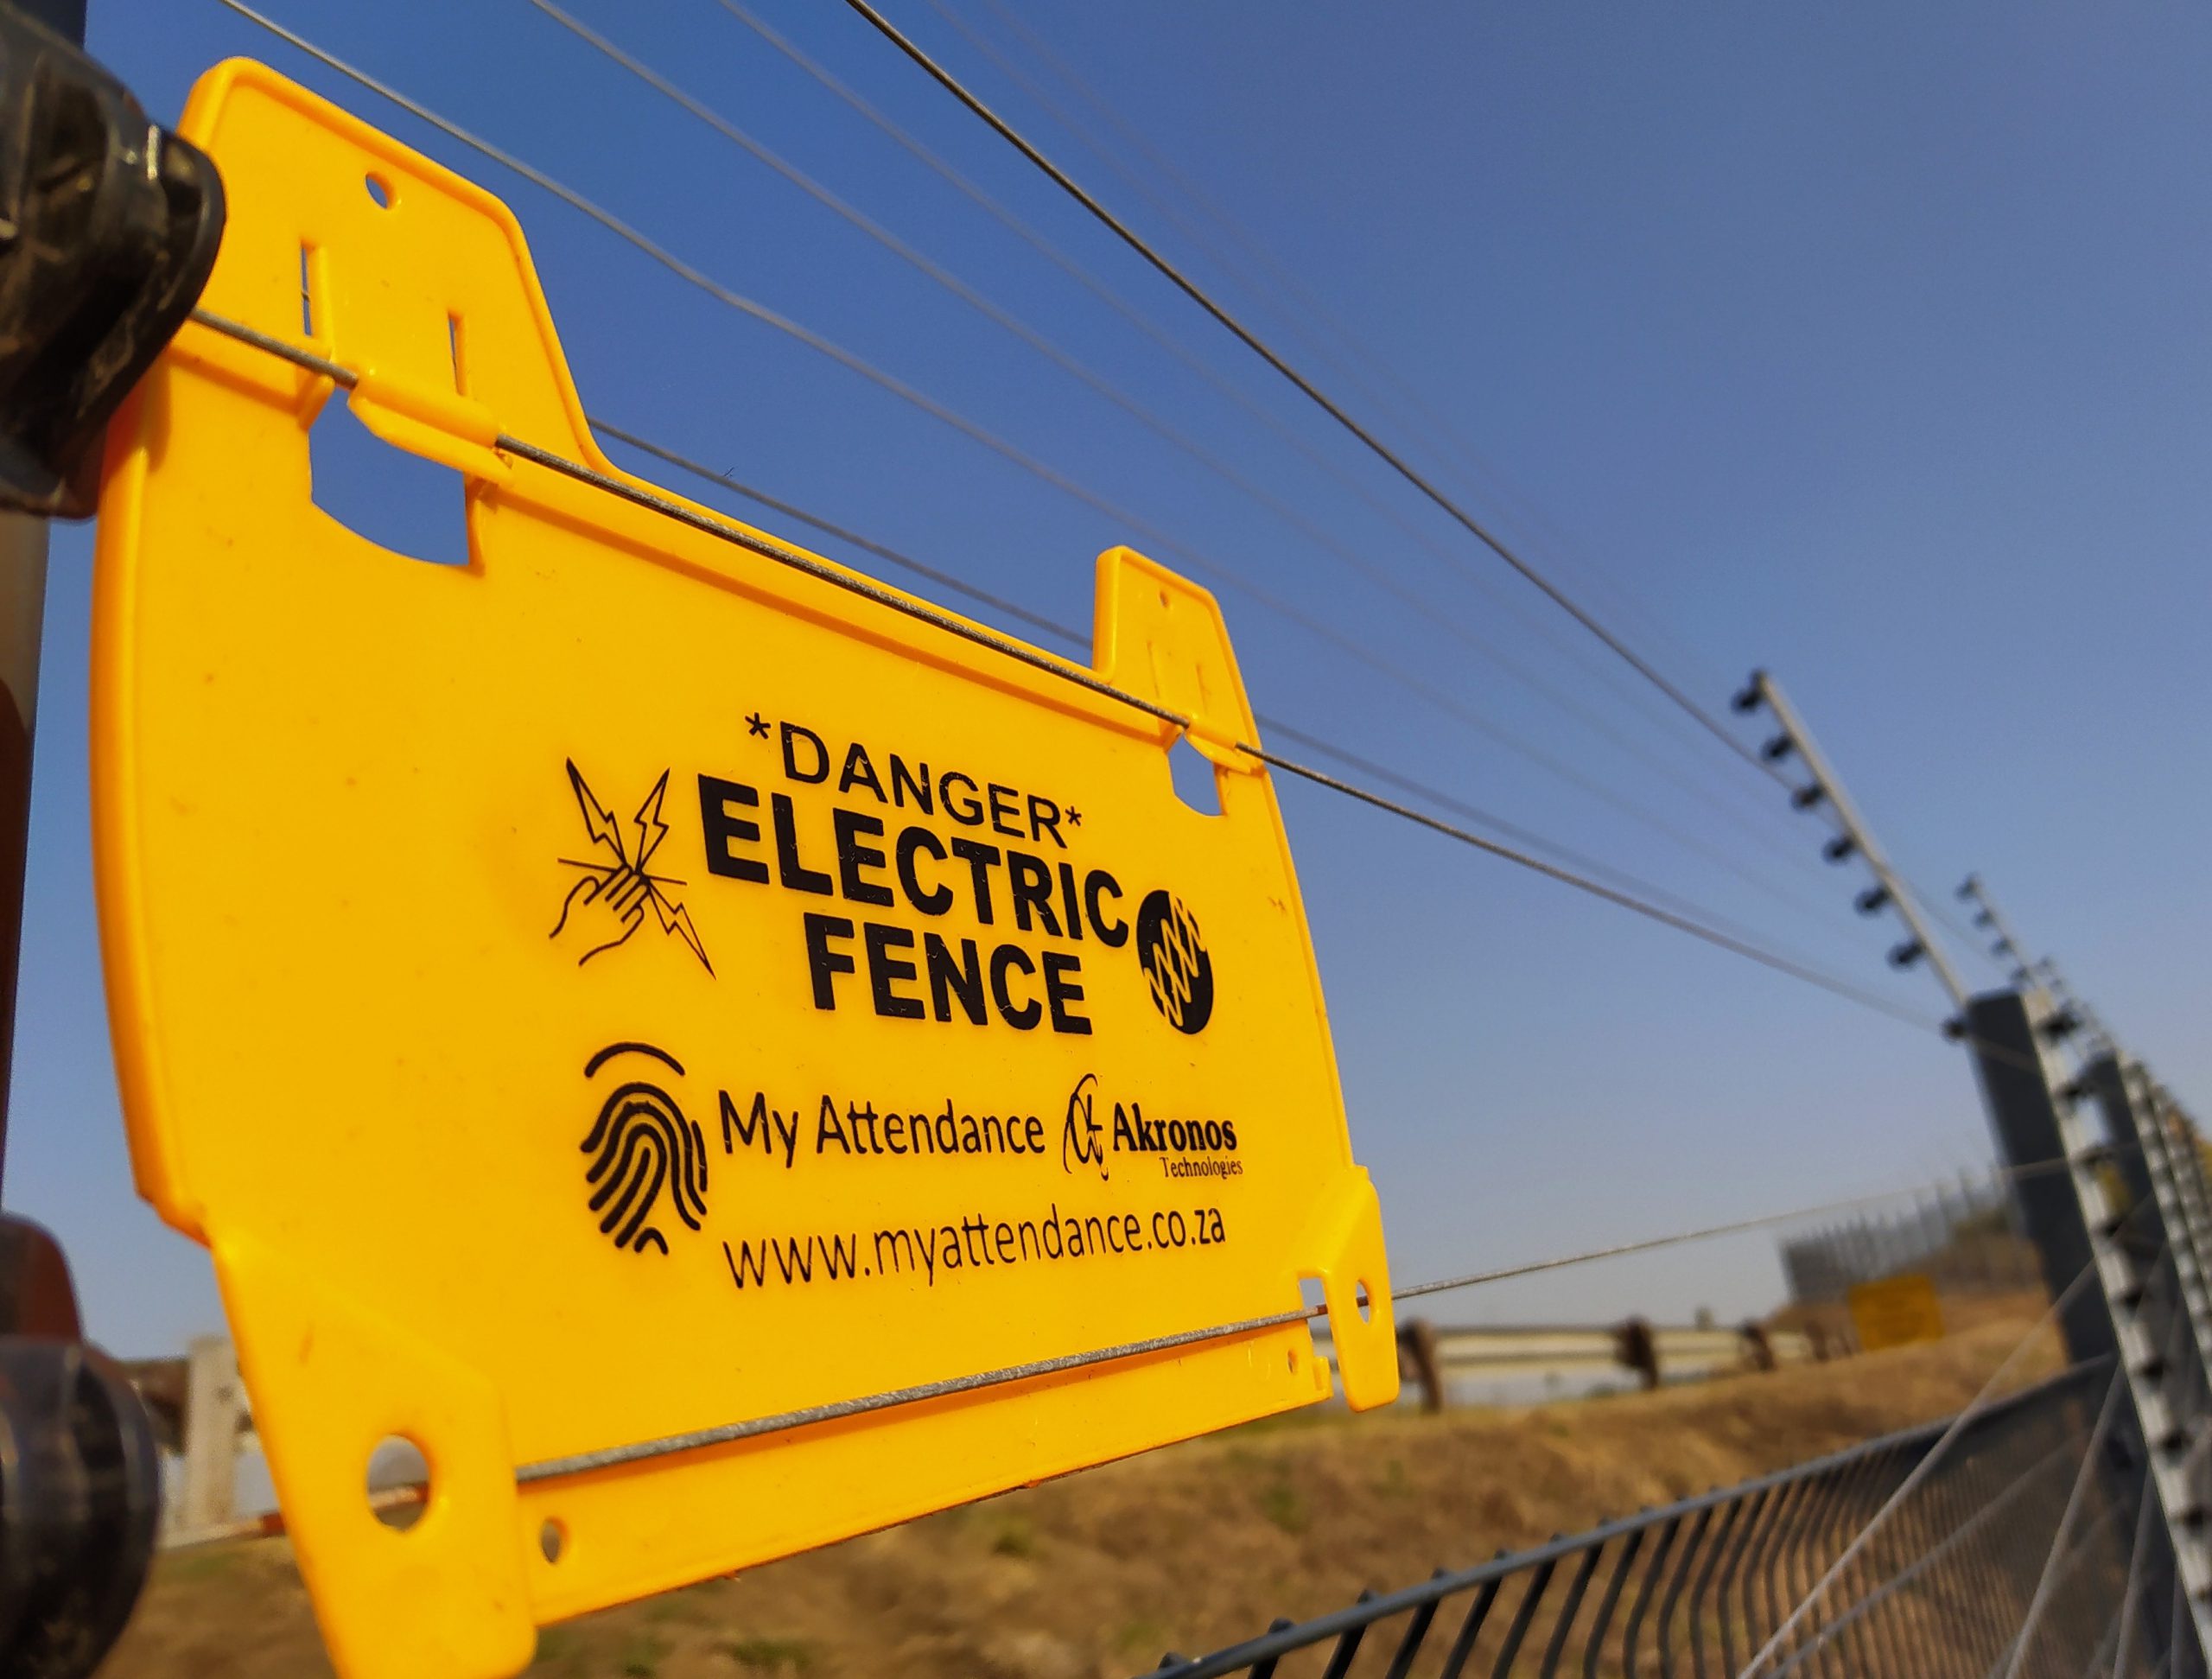 7 days electric fence